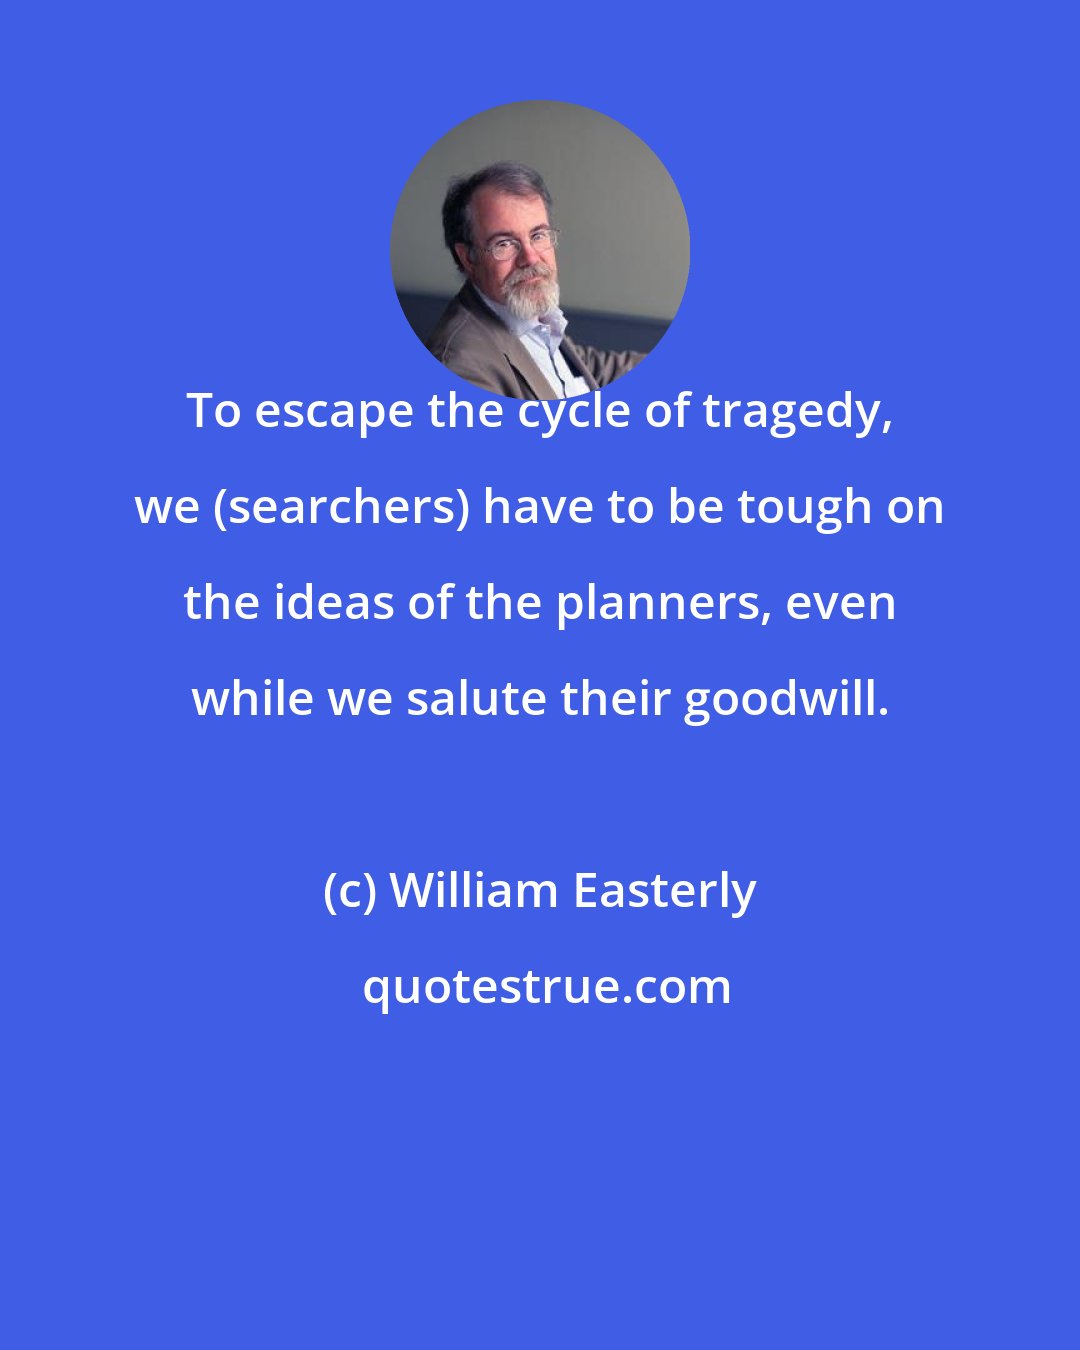 William Easterly: To escape the cycle of tragedy, we (searchers) have to be tough on the ideas of the planners, even while we salute their goodwill.